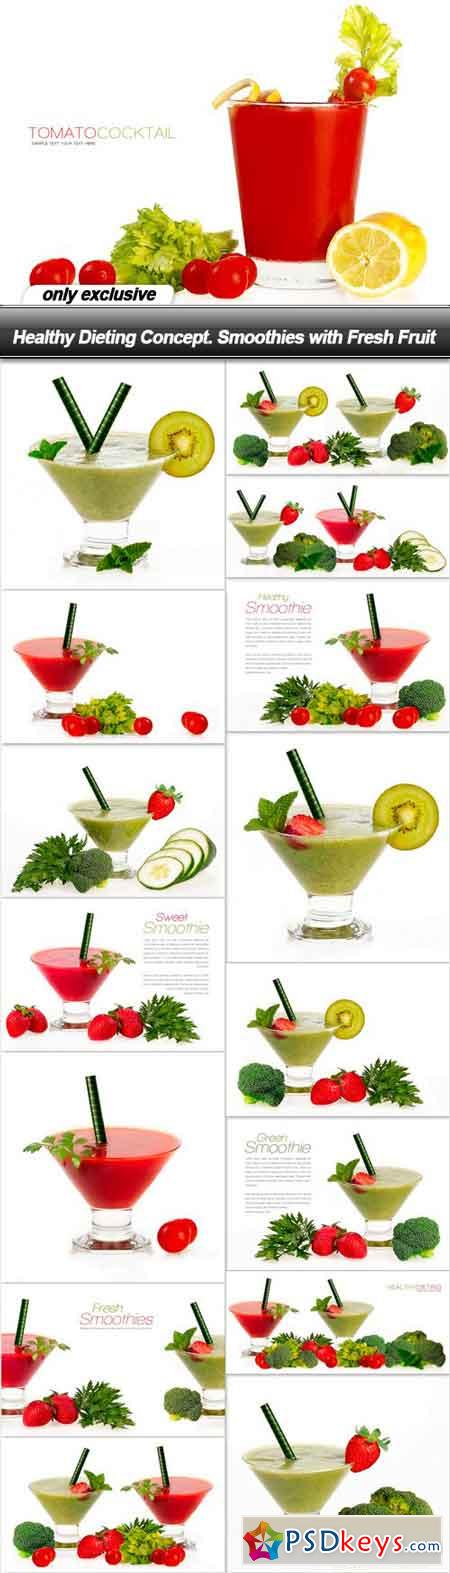 Healthy Dieting Concept. Smoothies with Fresh Fruit - 16 UHQ JPEG